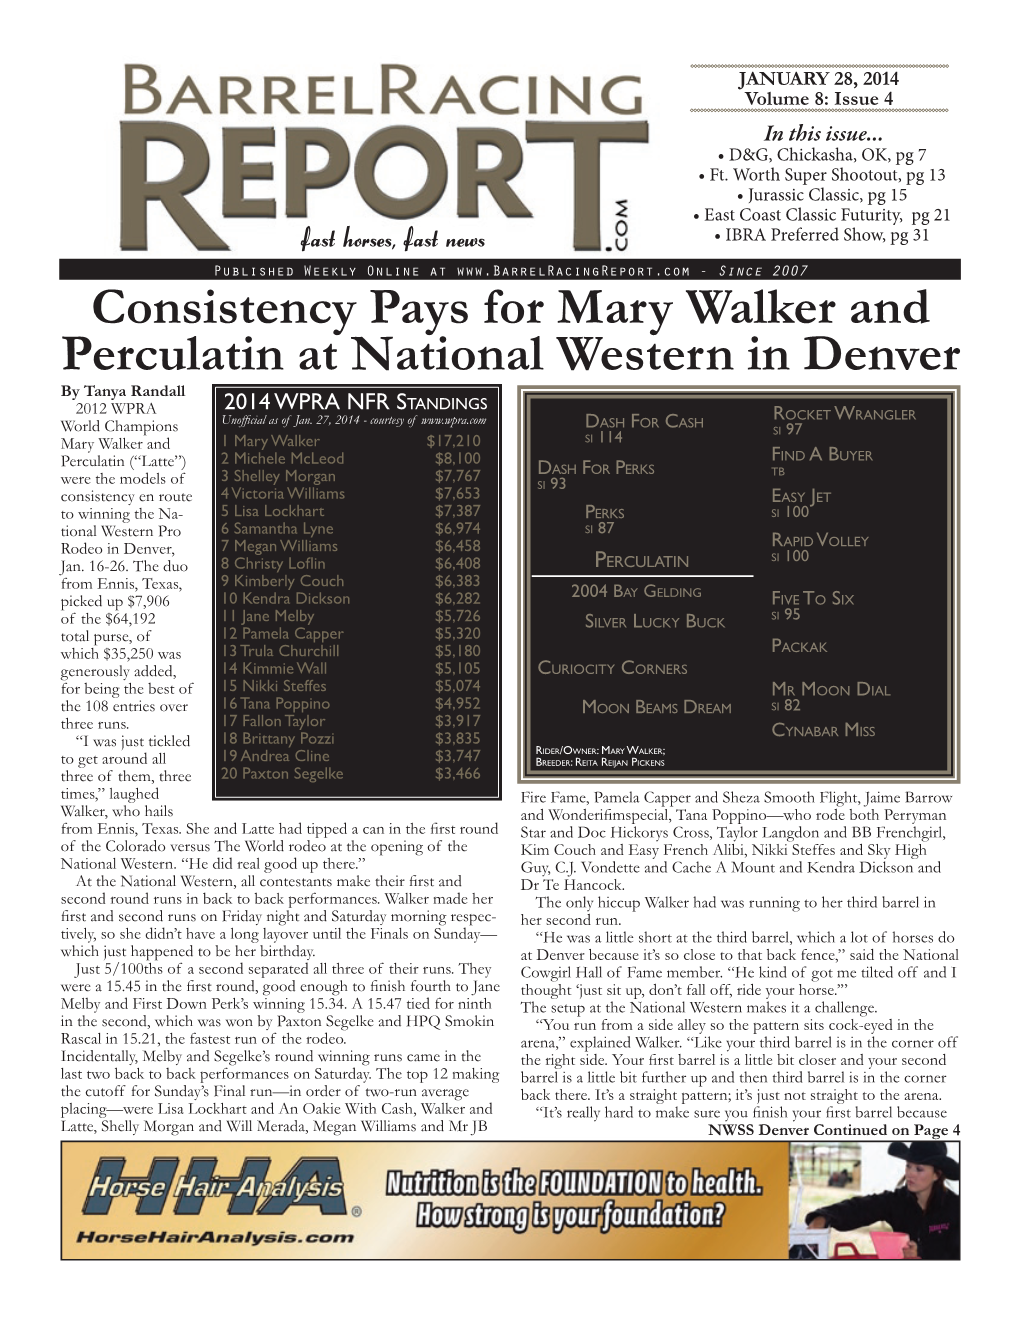 Consistency Pays for Mary Walker and Perculatin at National Western In